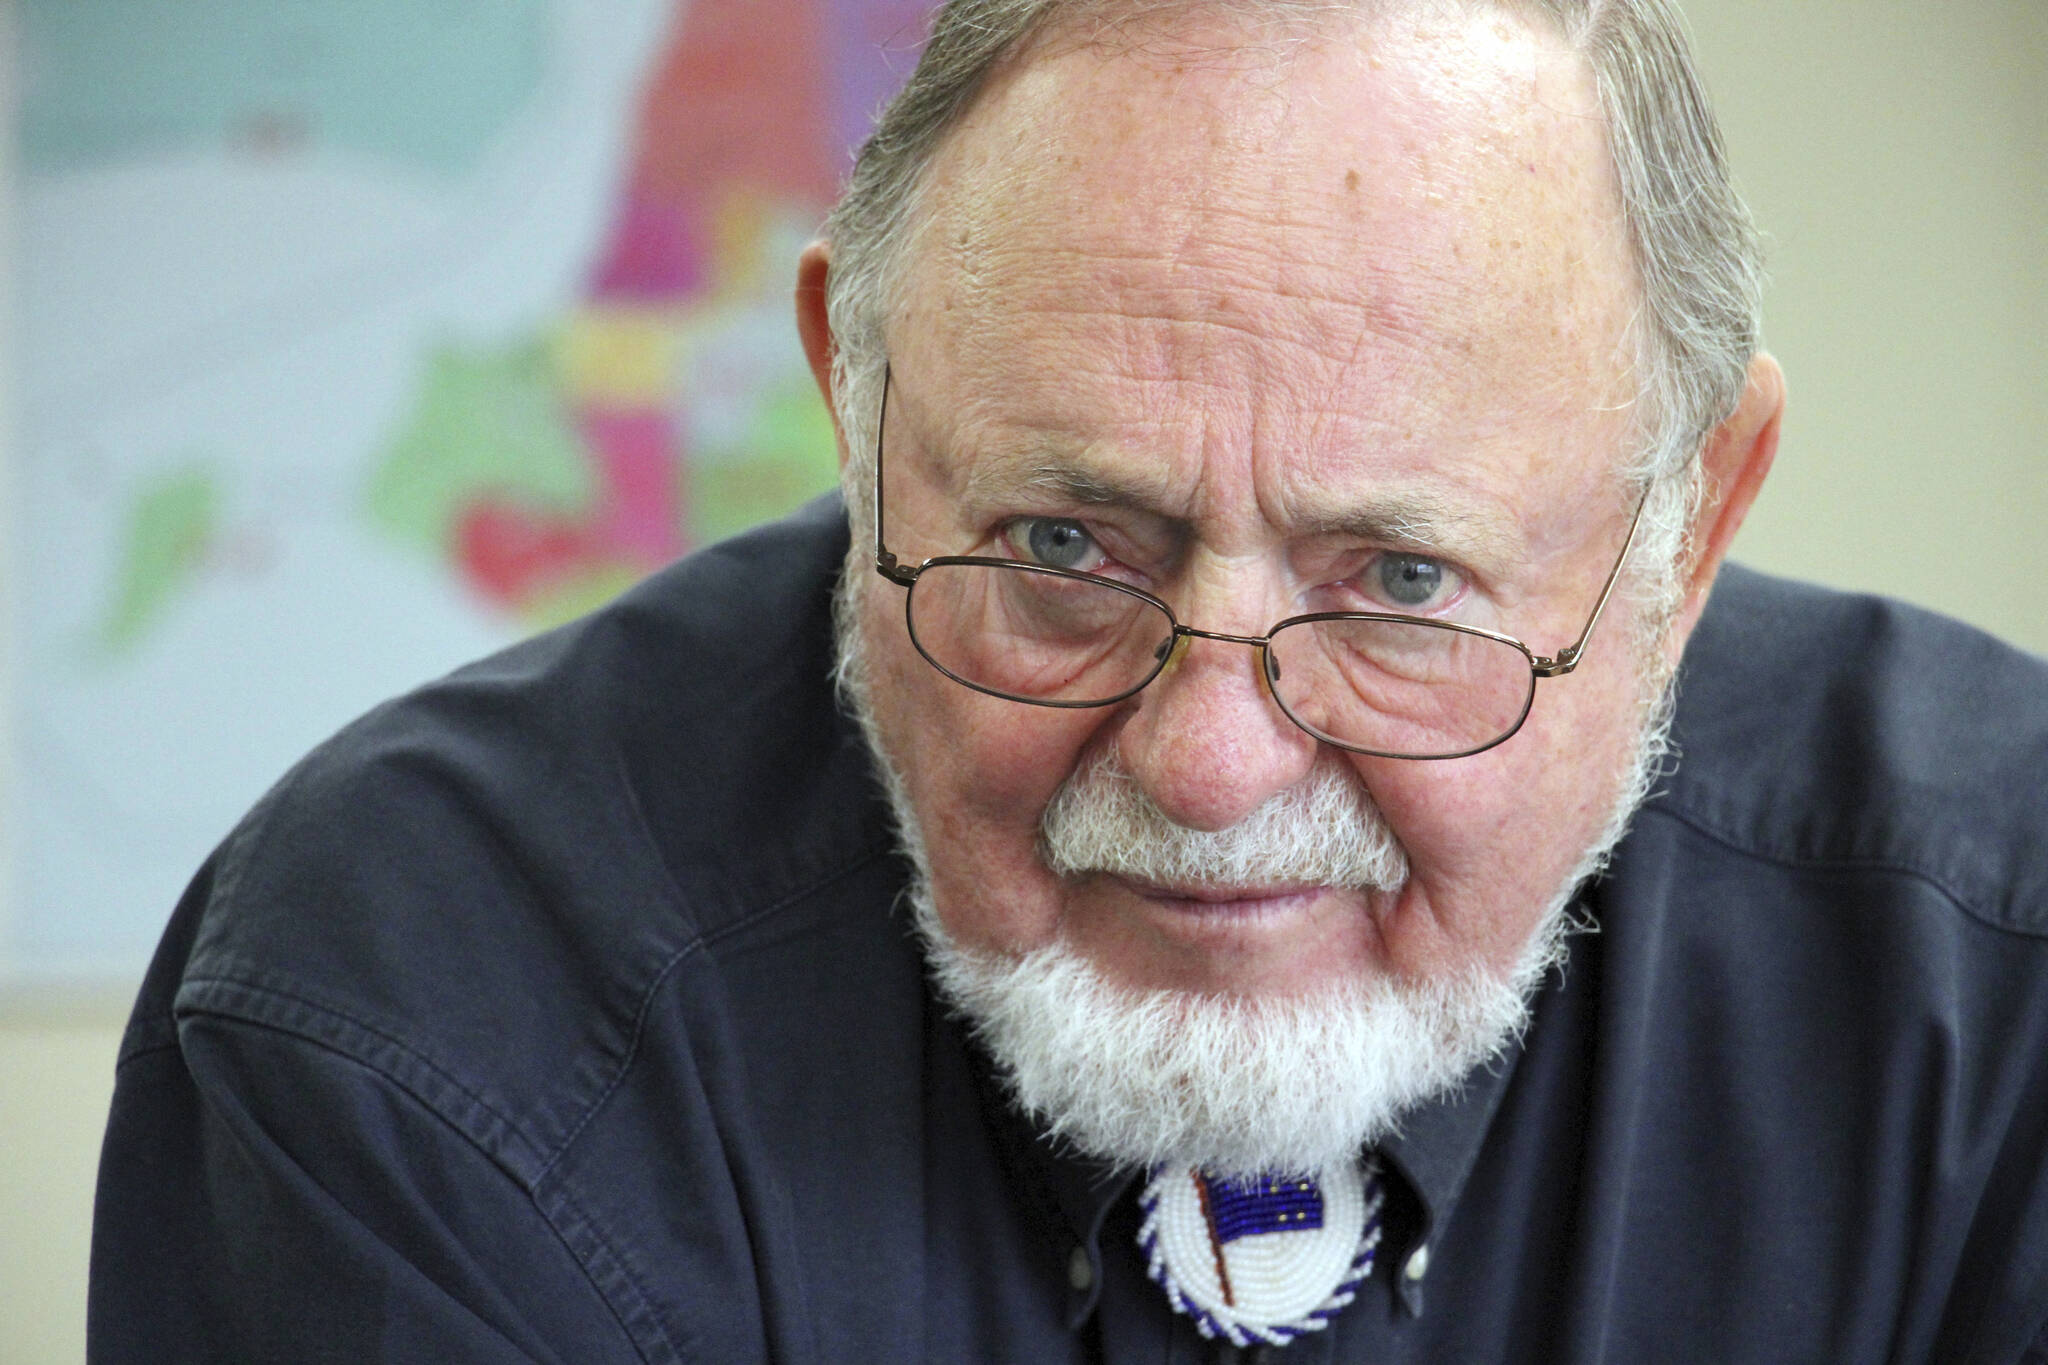 U.S. Rep. Don Young answers a reporter's question after filing paperwork for reelection at the Alaska Division of Elections in Anchorage, Alaska. Young, the longest-serving member of Alaska’s congressional delegation, died Friday, March 18, 2022. He was 88. (AP Photo / Mark Thiessen)